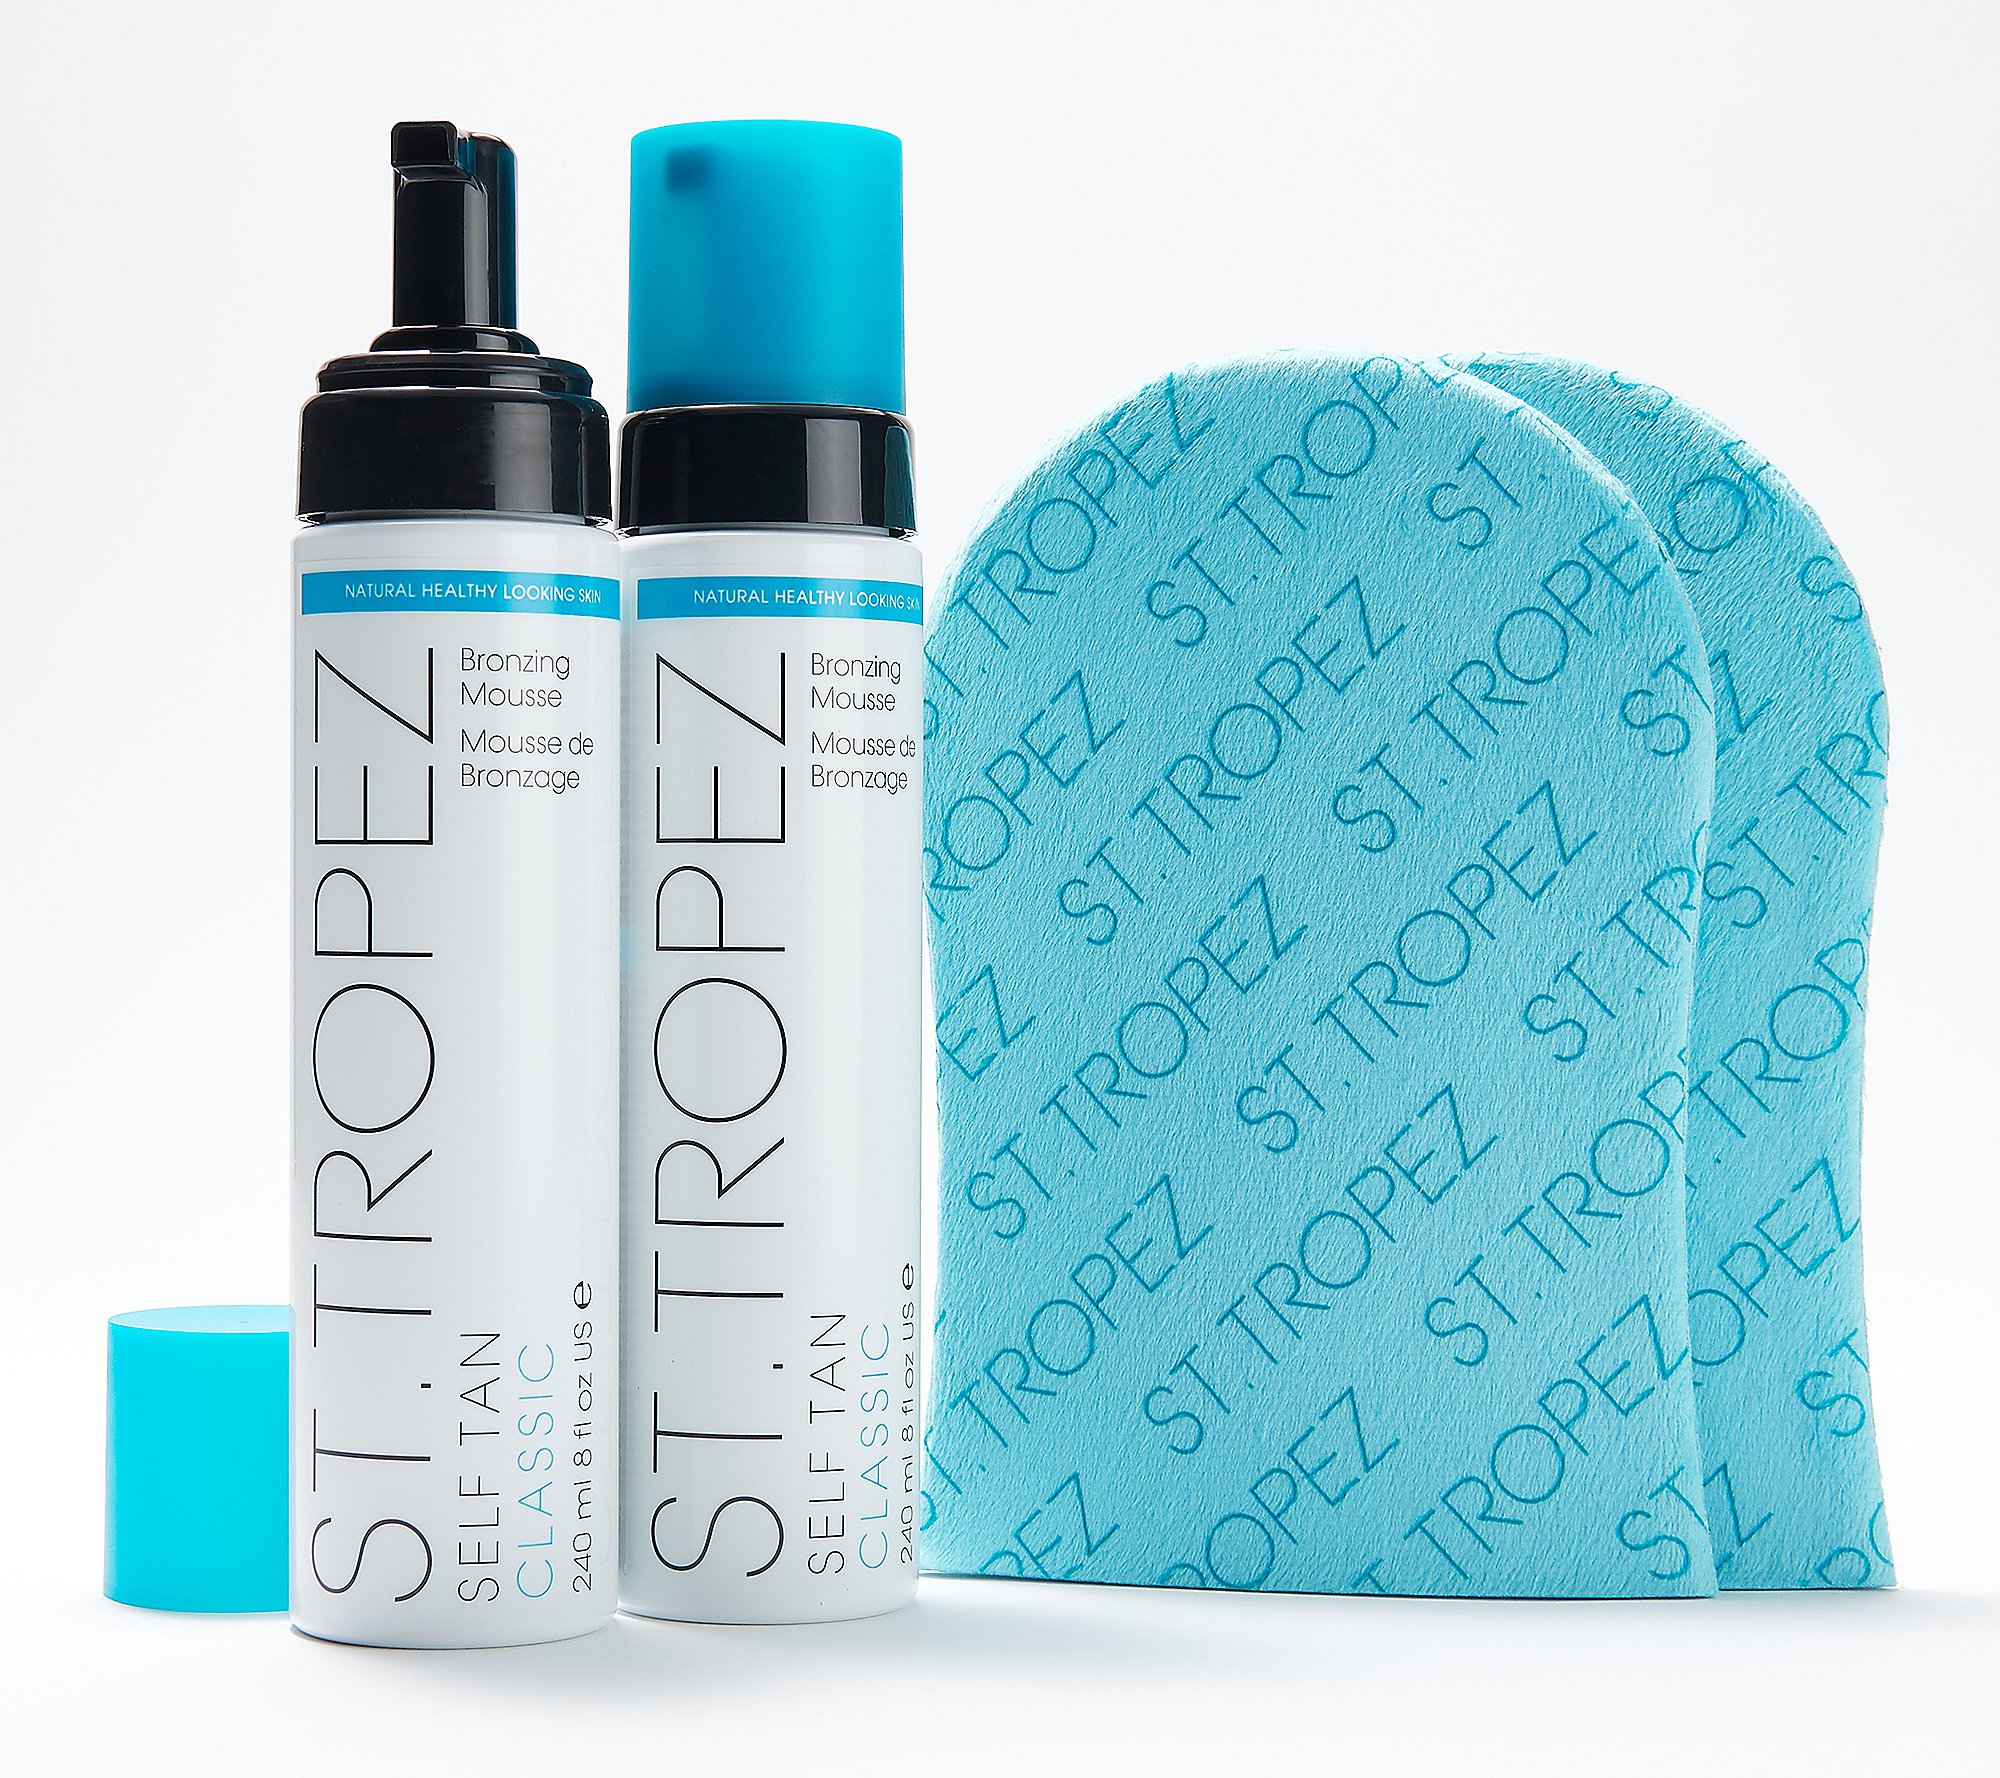 St. Tropez Set of 8 oz. Classic Self Tan Mousse with Mitts - QVC.com